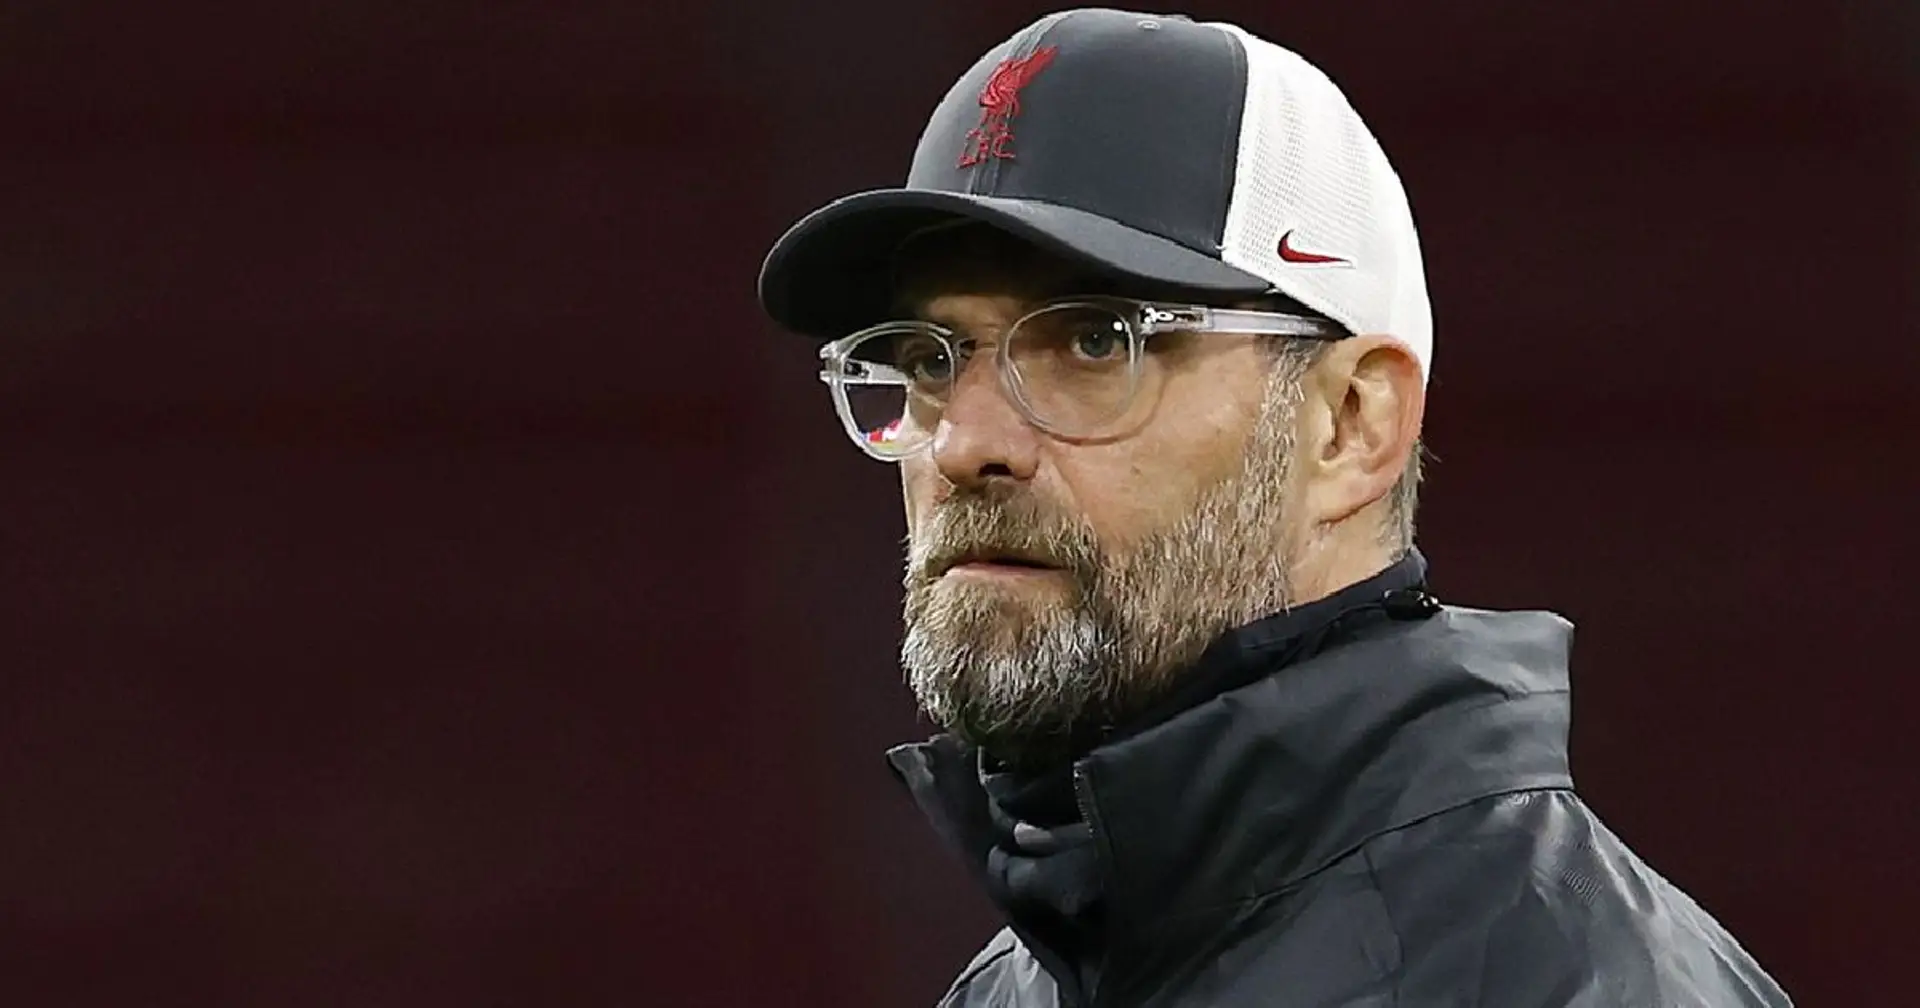 Joe Cole: 'I don't necessarily feel for Jurgen Klopp, he's had it his way for 2 years'